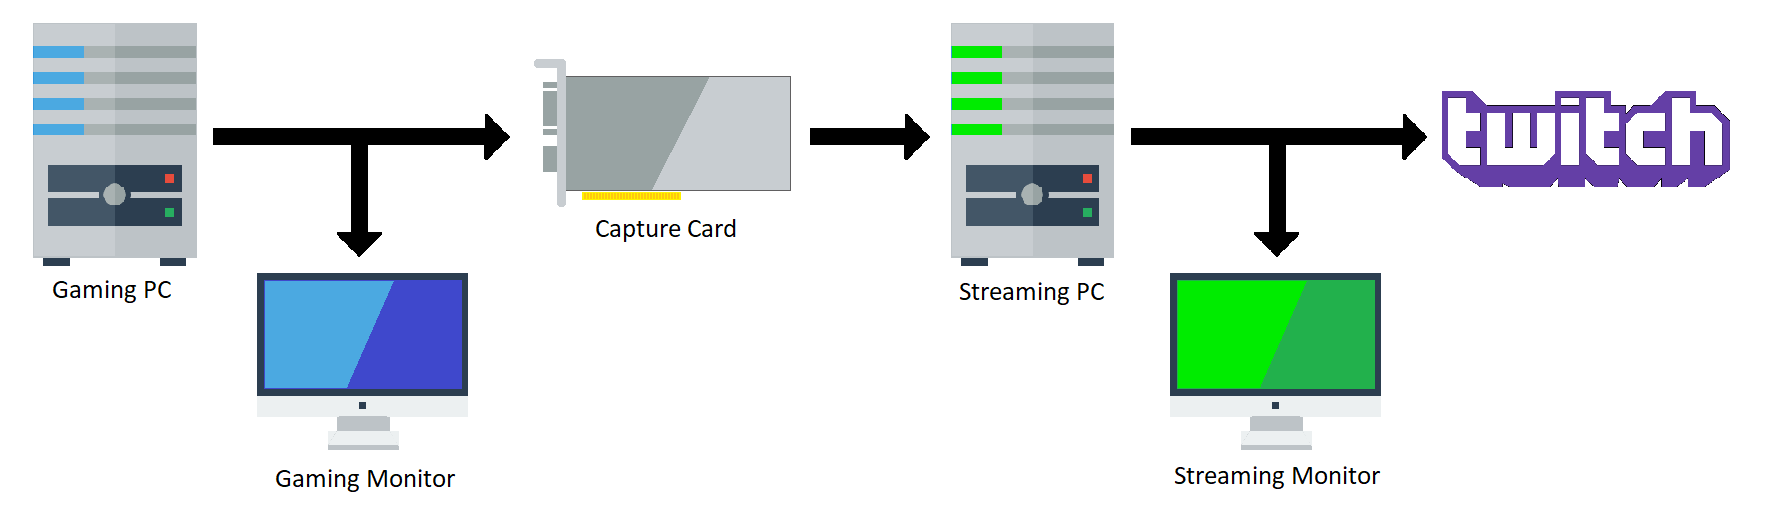 What Does a Capture Card Do?